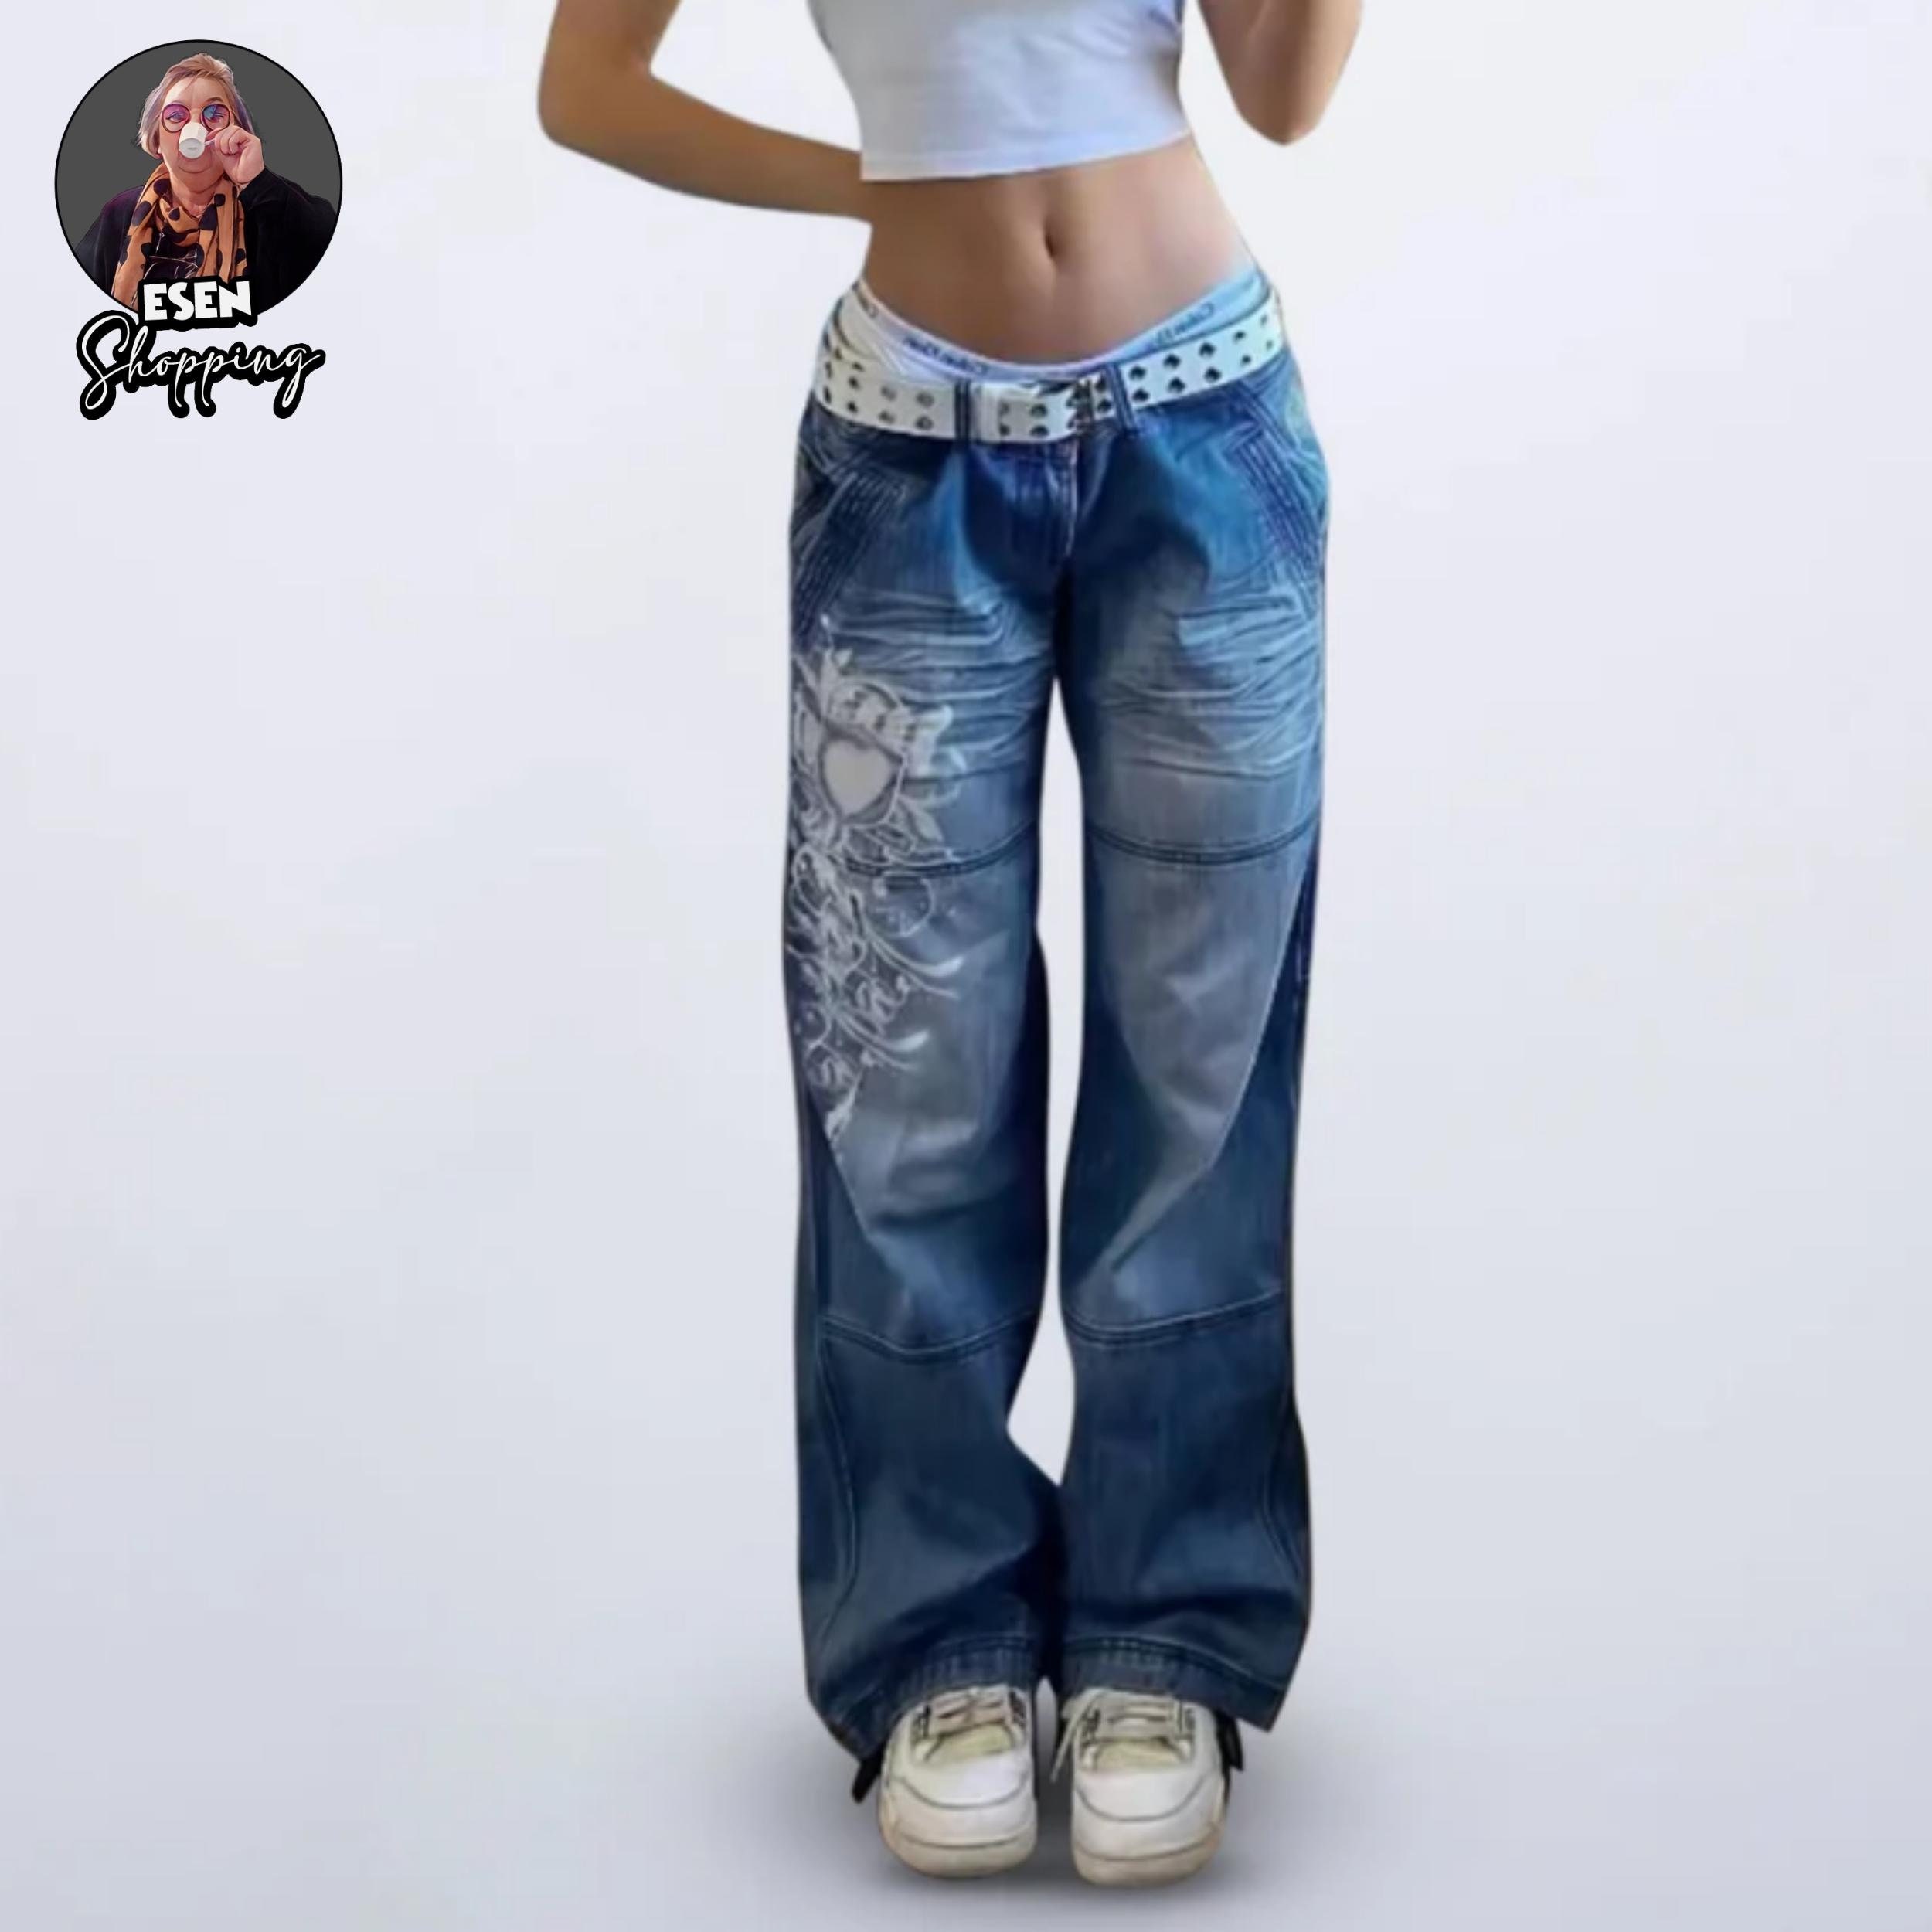 Hopecn Women Y2K Baggy Jeans Cross Ripped Aesthetic High Waist Straight Leg Pants  90S Vintage Fashion Grunge StreetwearBlue16S at Amazon Womens Jeans  store